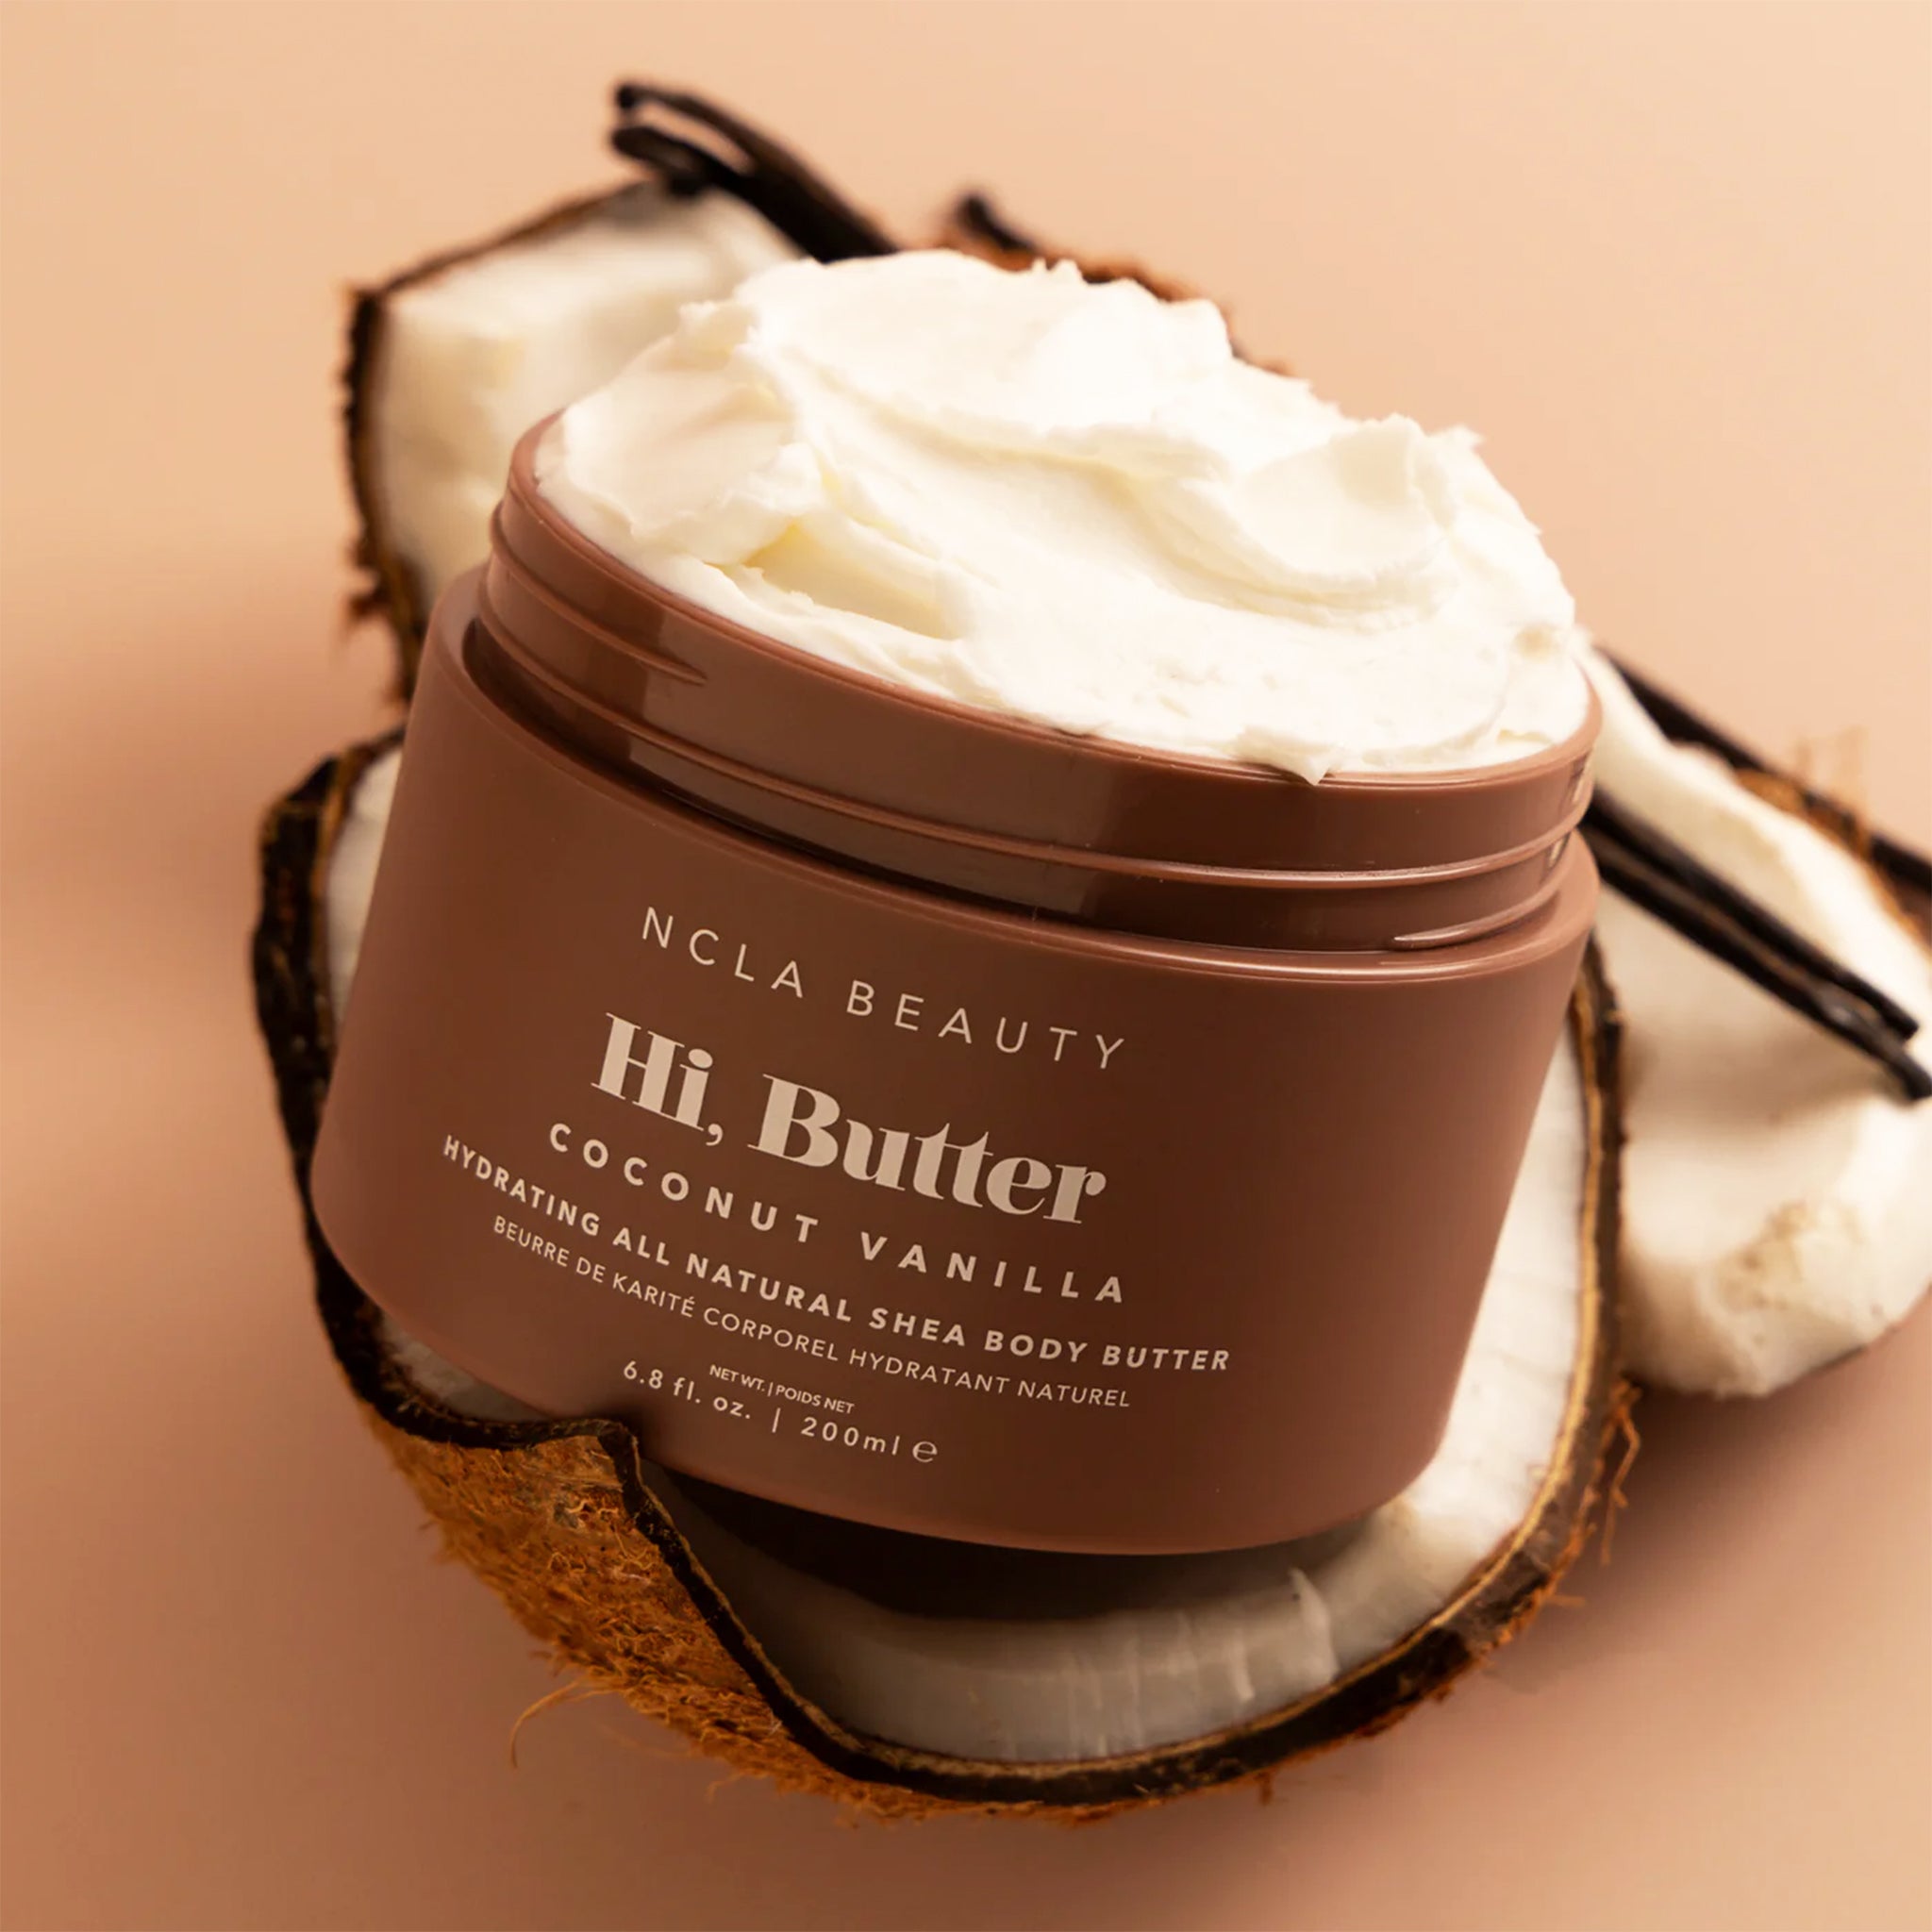 A brown jar of body butter in a coconut vanilla scent.